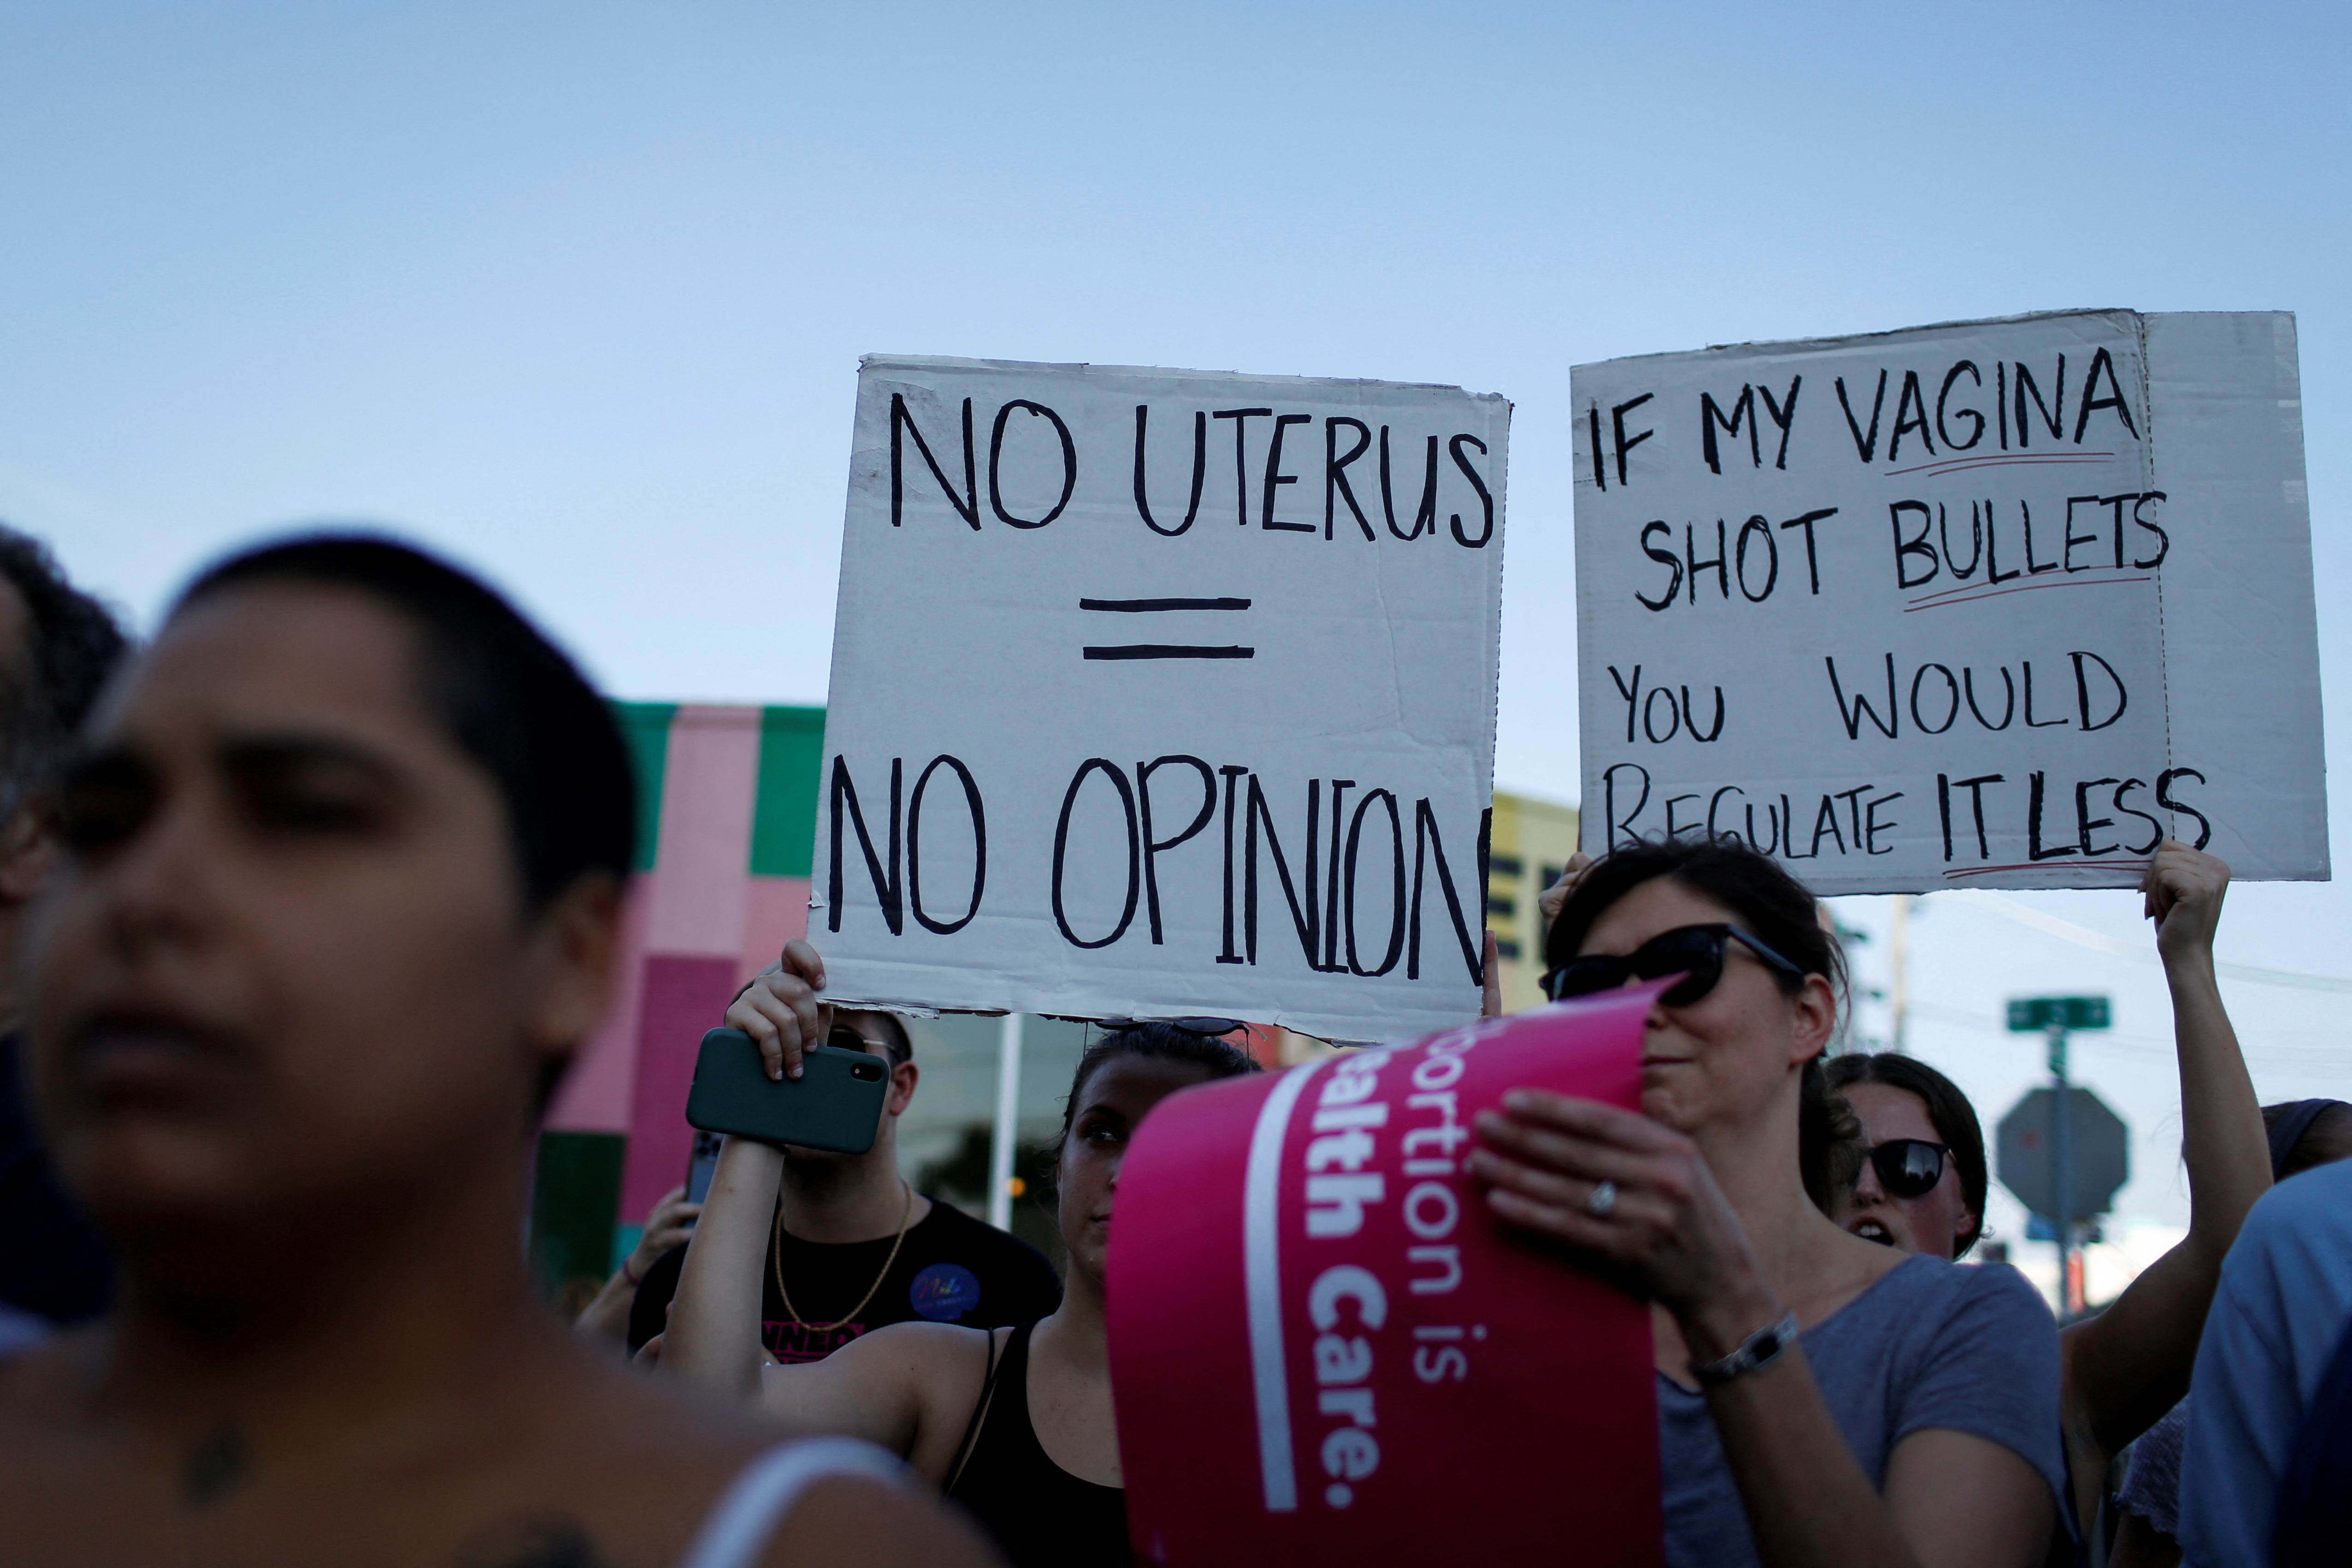 Protests across the country over access to abortion